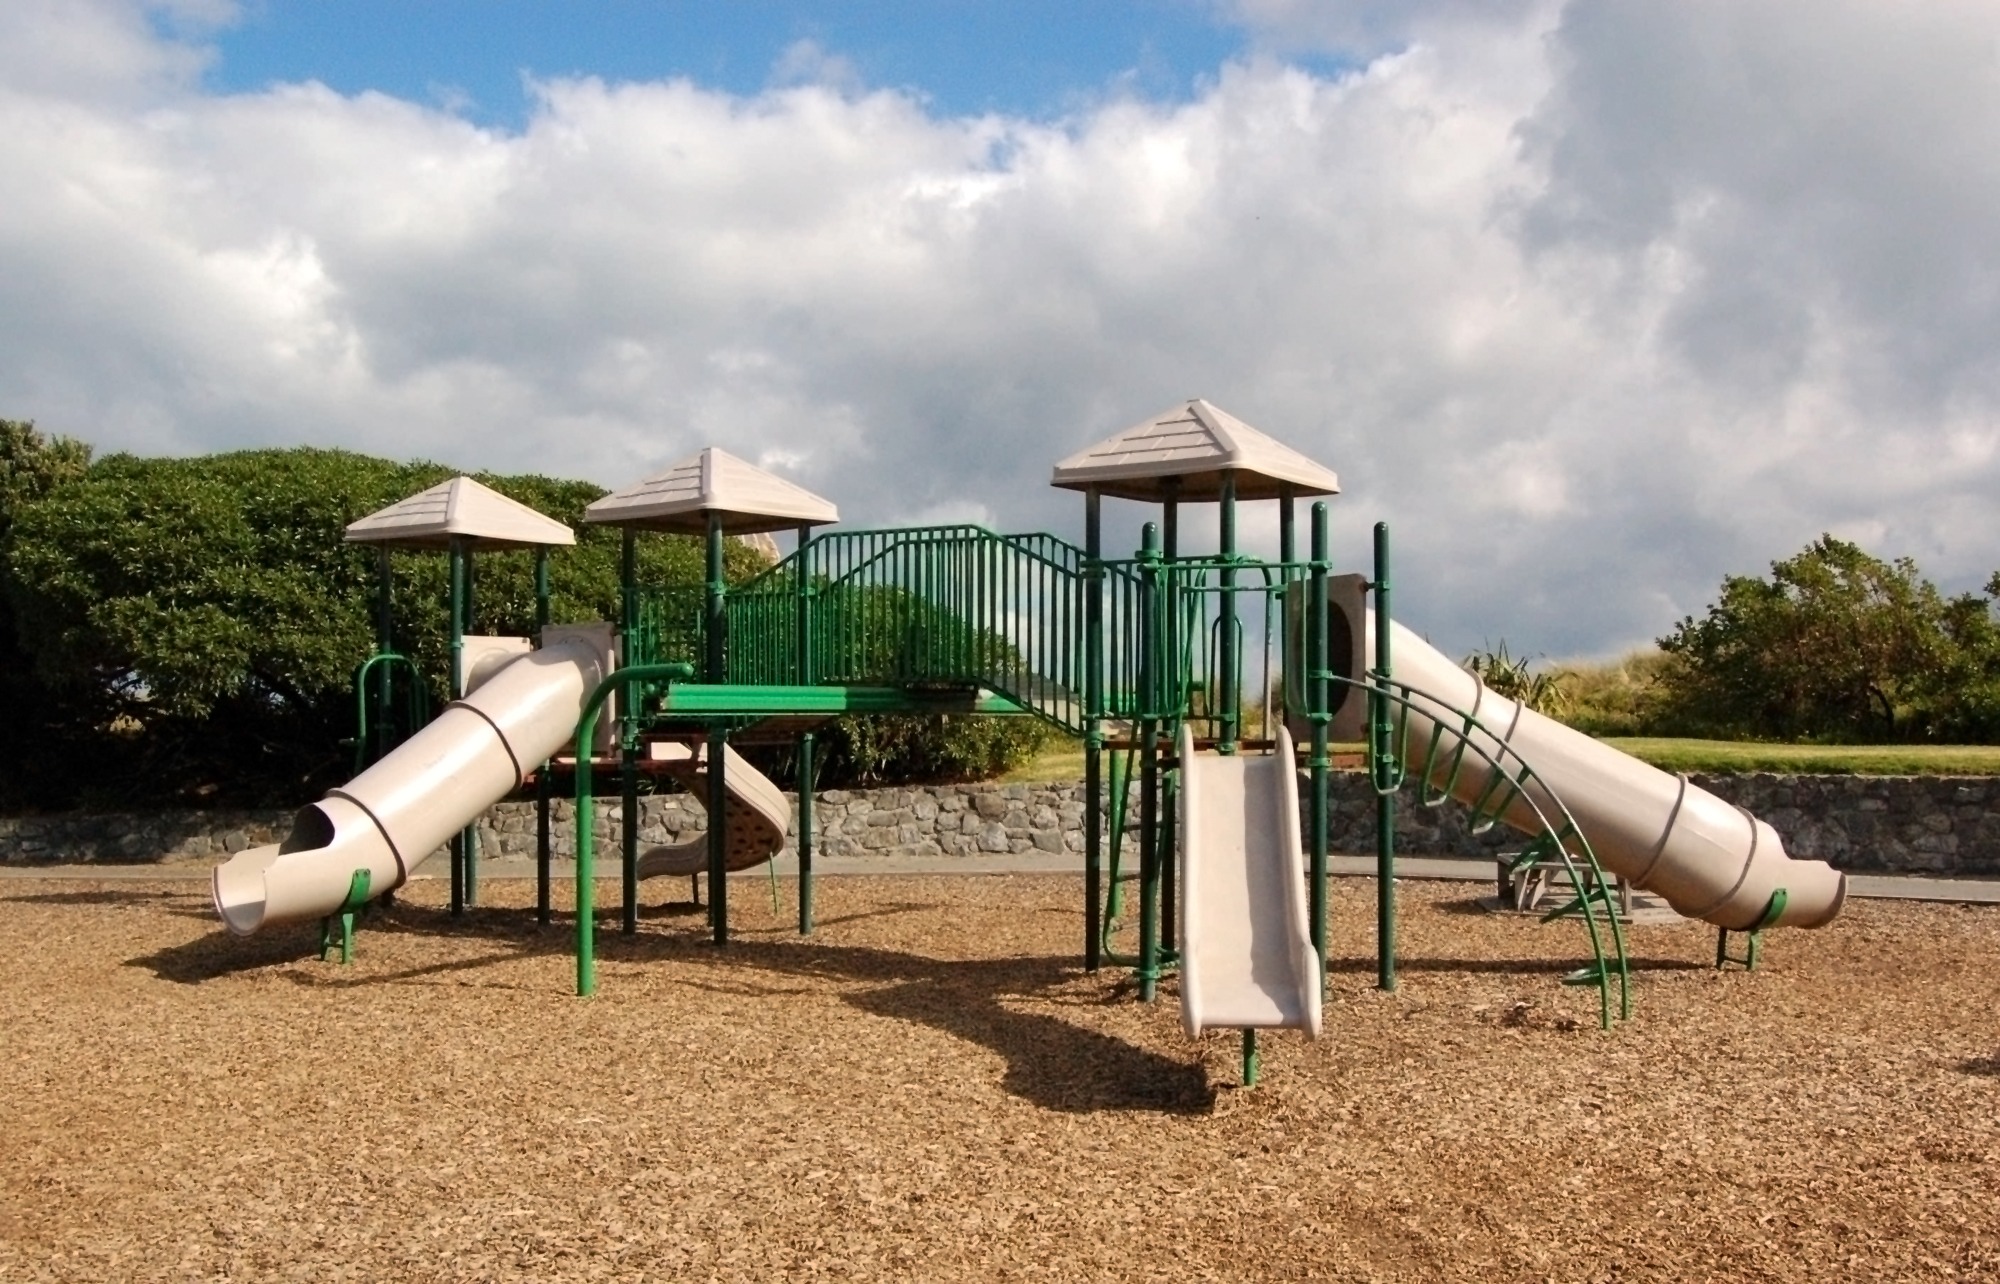 Best Playground Ground Cover Options, Swing Set Ground Cover